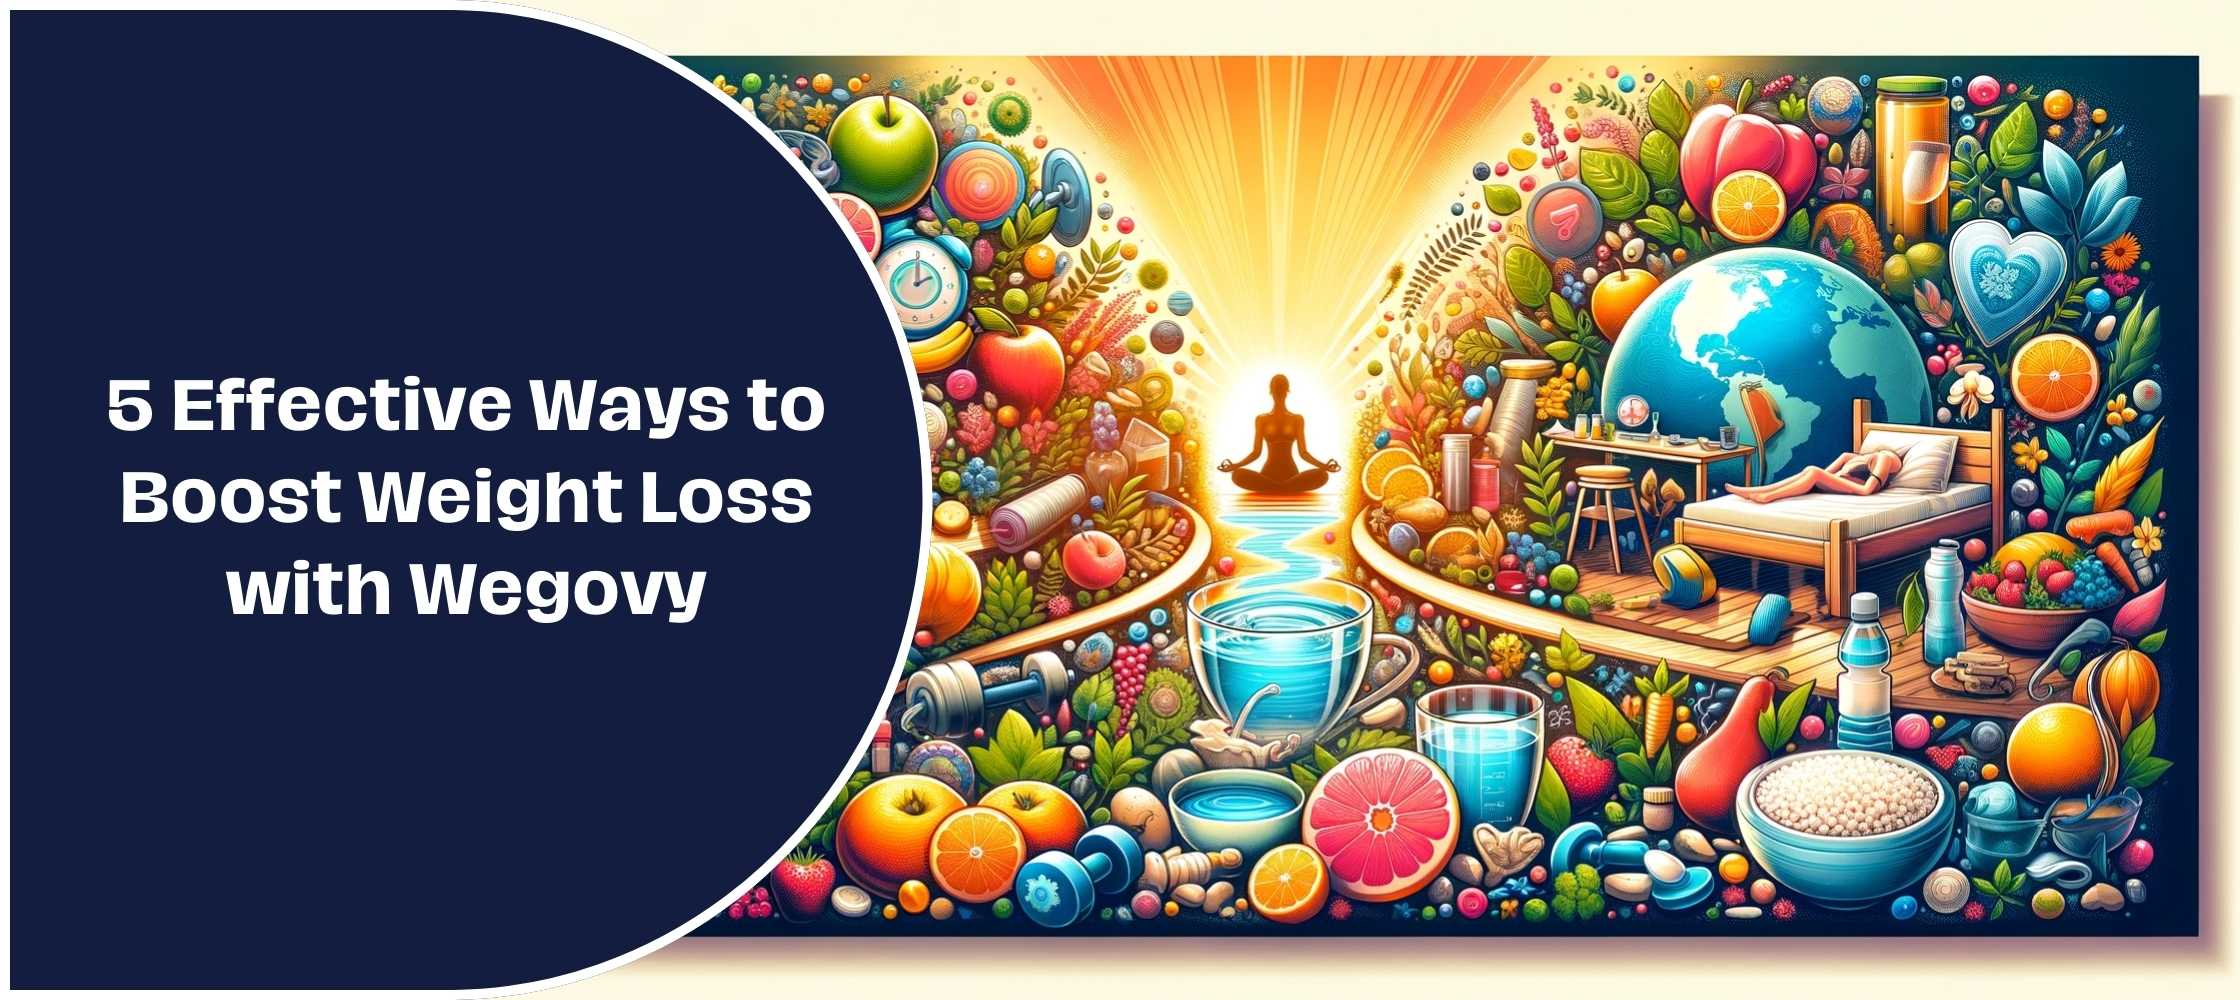 5 Effective Ways to Boost Weight Loss with Wegovy